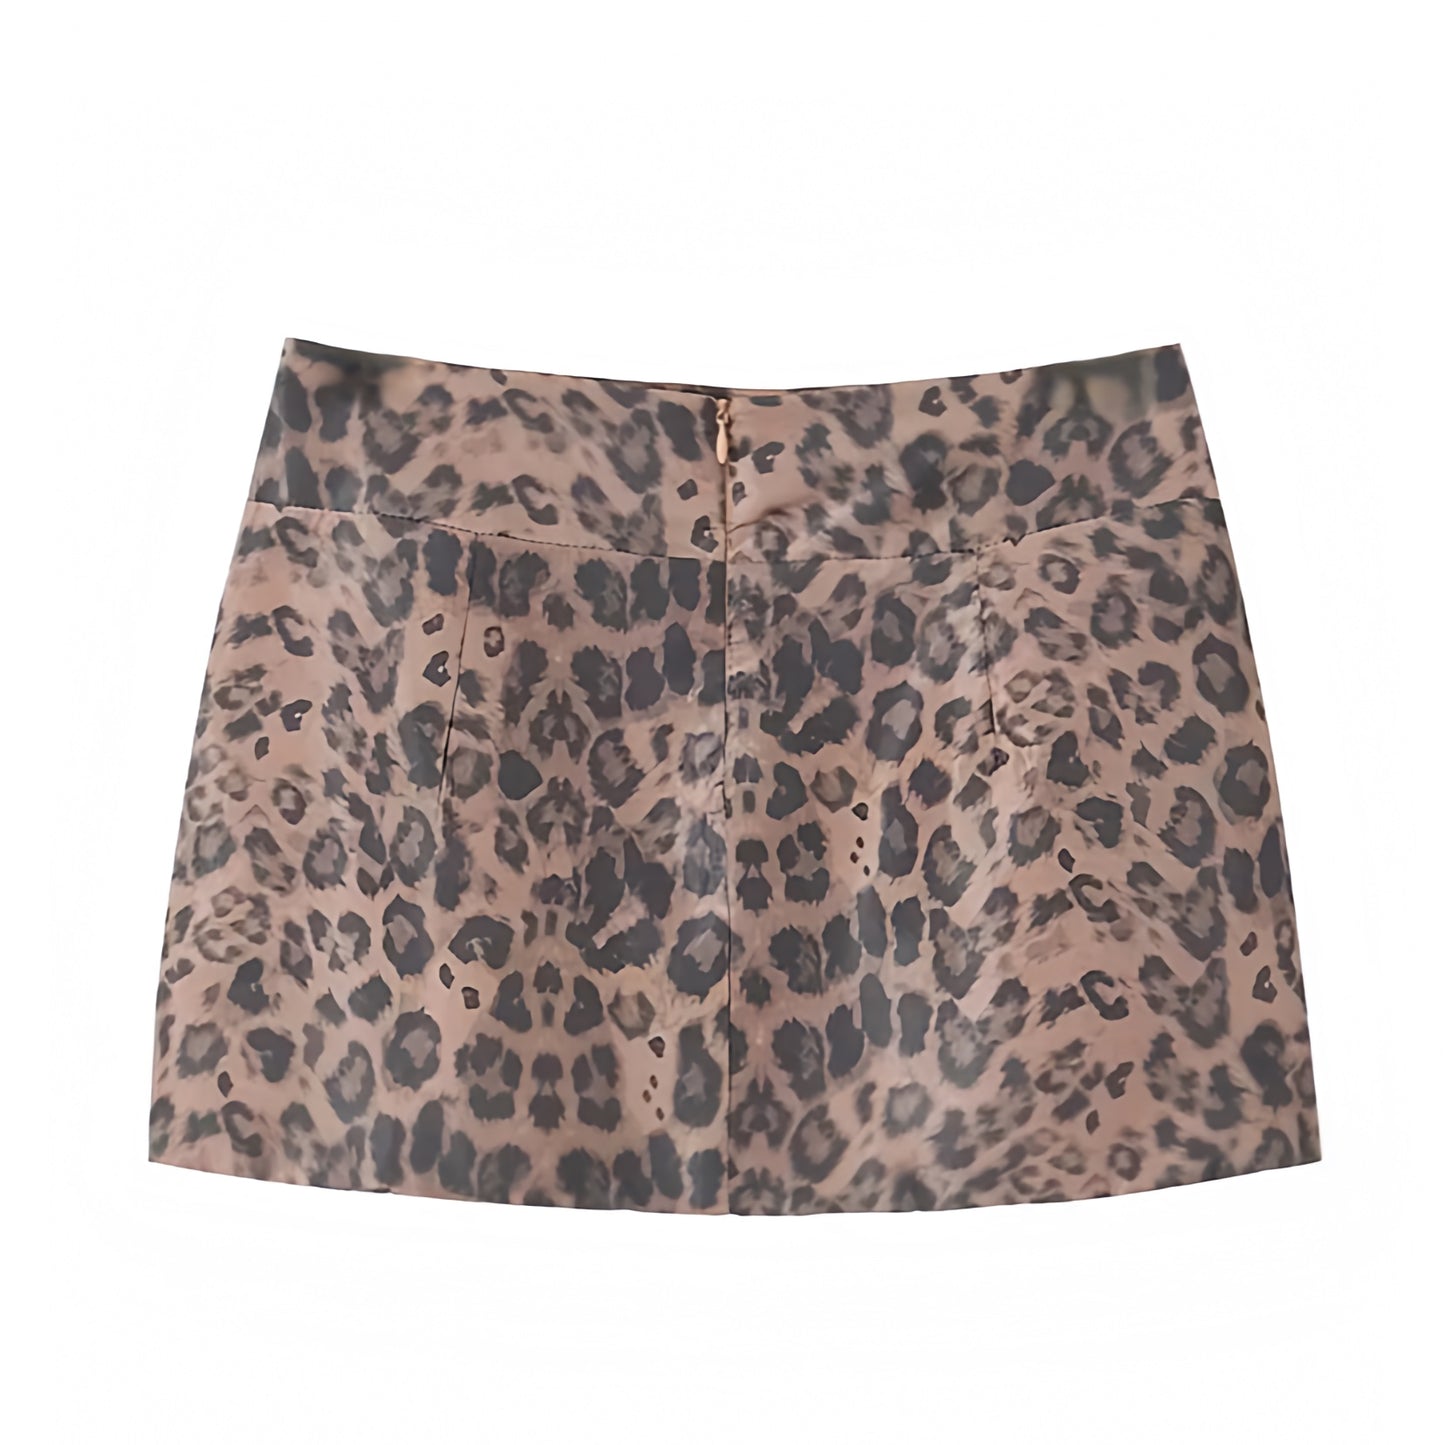 leopard-cheetah-animal-print-patterned-brown-black-multi-color-slim-fit-mid-low-rise-pencil-short-micro-mini-skirt-women-ladies-chic-trendy-spring-2024-summer-casual-classy-feminine-party-date-night-out-sexy-club-wear-y2k-exotic-tropical-vacation-beach-wear-zara-revolve-white-fox-princess-polly-edikted-emminol-reformation-brandy-melville